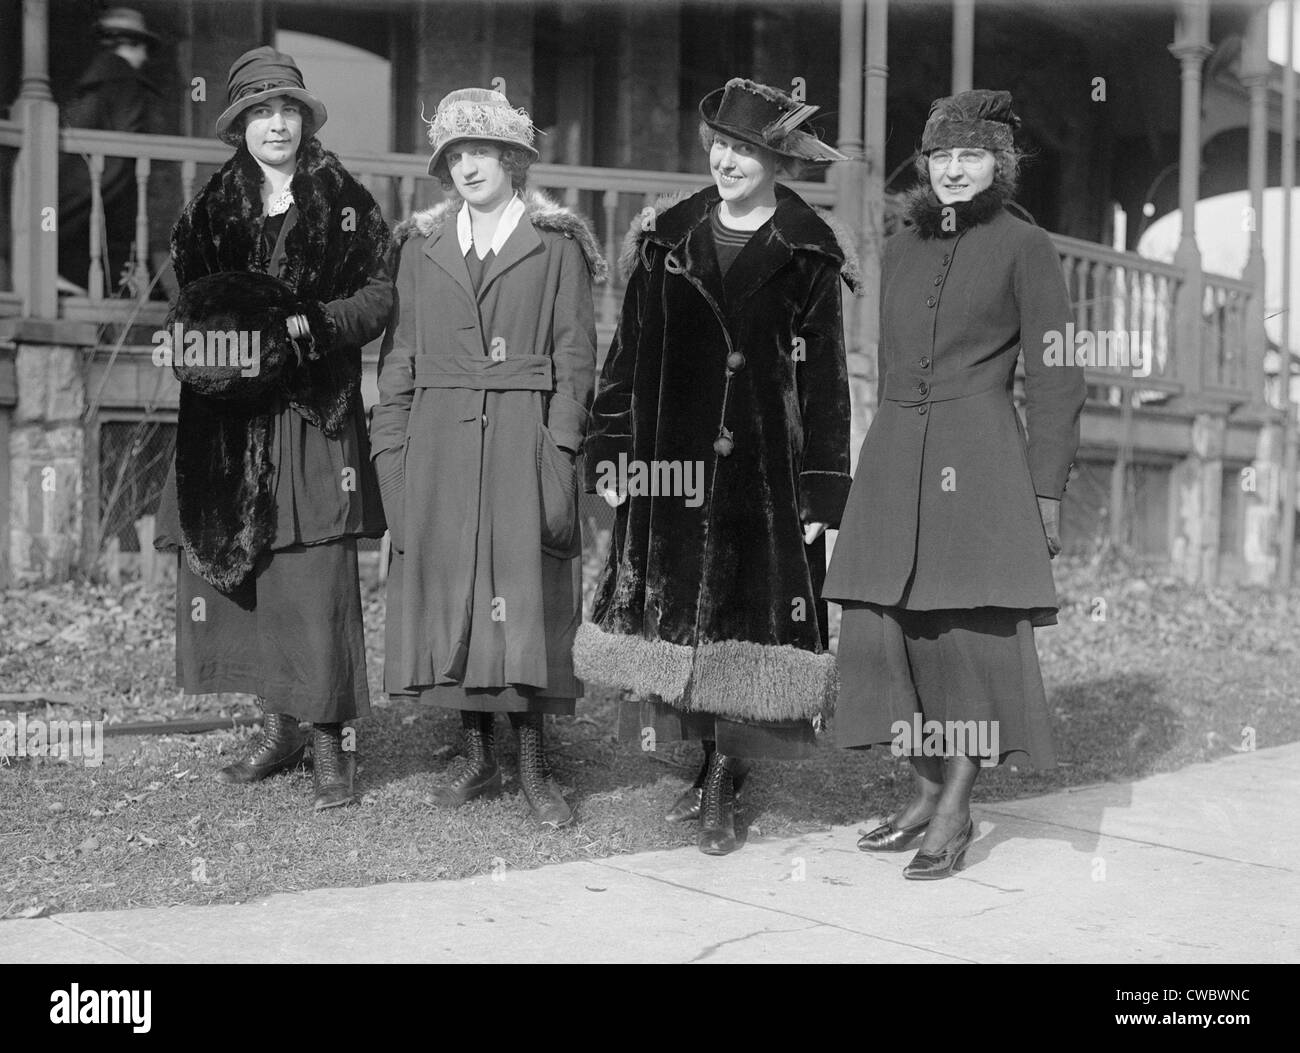 Group portrait of Polish-American young women in 1918 Stock Photo - Alamy